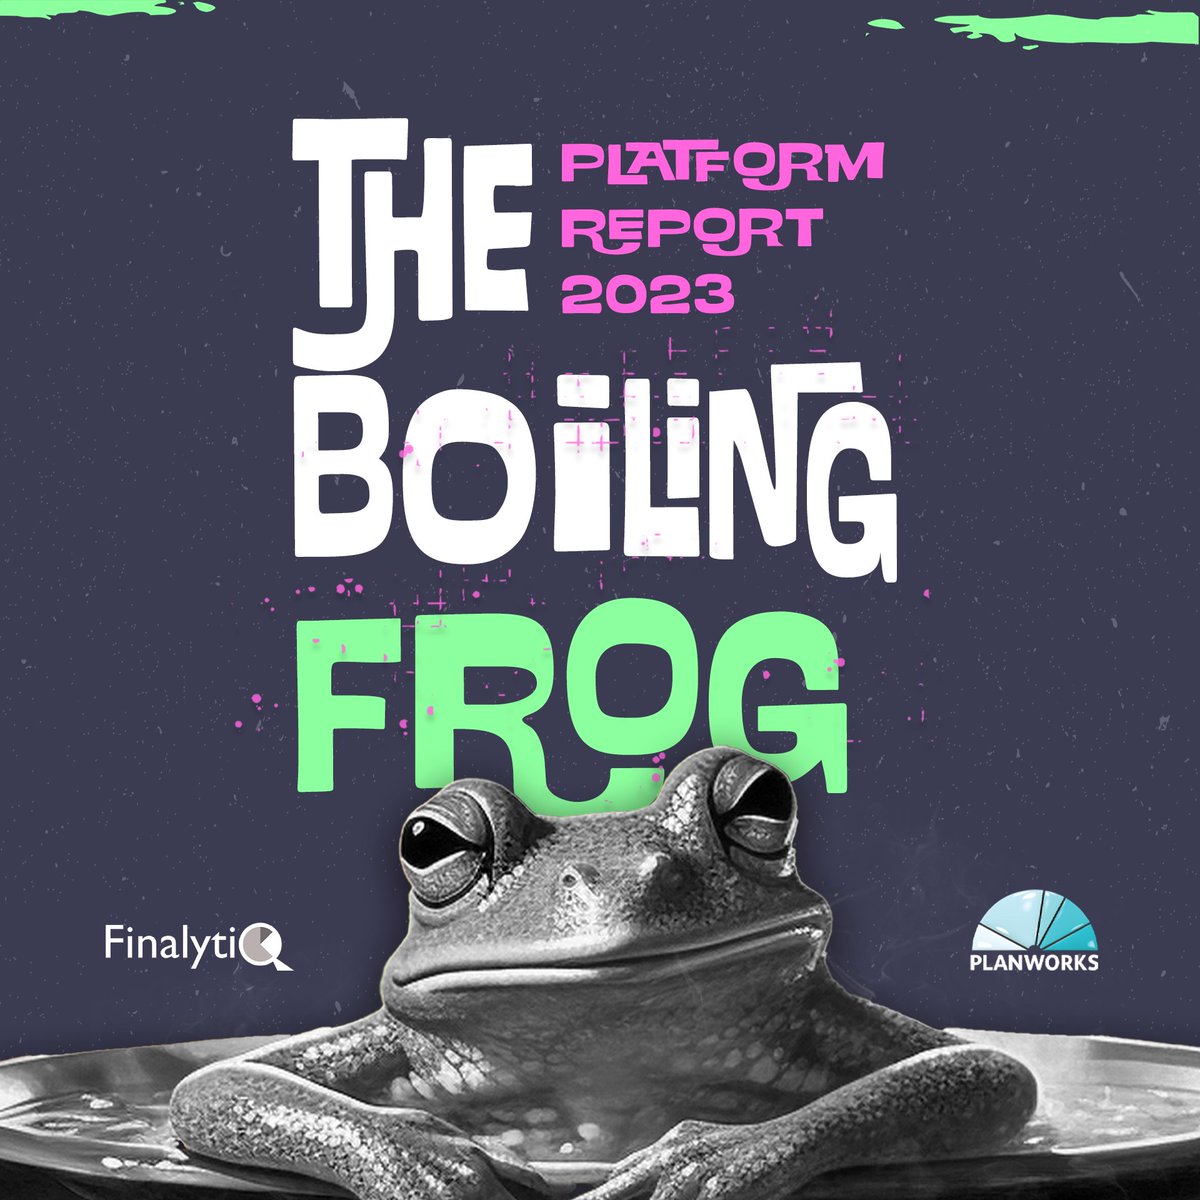 You are familiar with the popular metaphor of ‘slowly boiling a frog to death’, aren’t you? 🐸 🔮 Well, jump in, for an insight into our 2023 Platform Report 'The Boiling Frog' 👉 eu1.hubs.ly/H07Kbsq0 We're also hosting a webinar next Wednesday for further insights. 📆